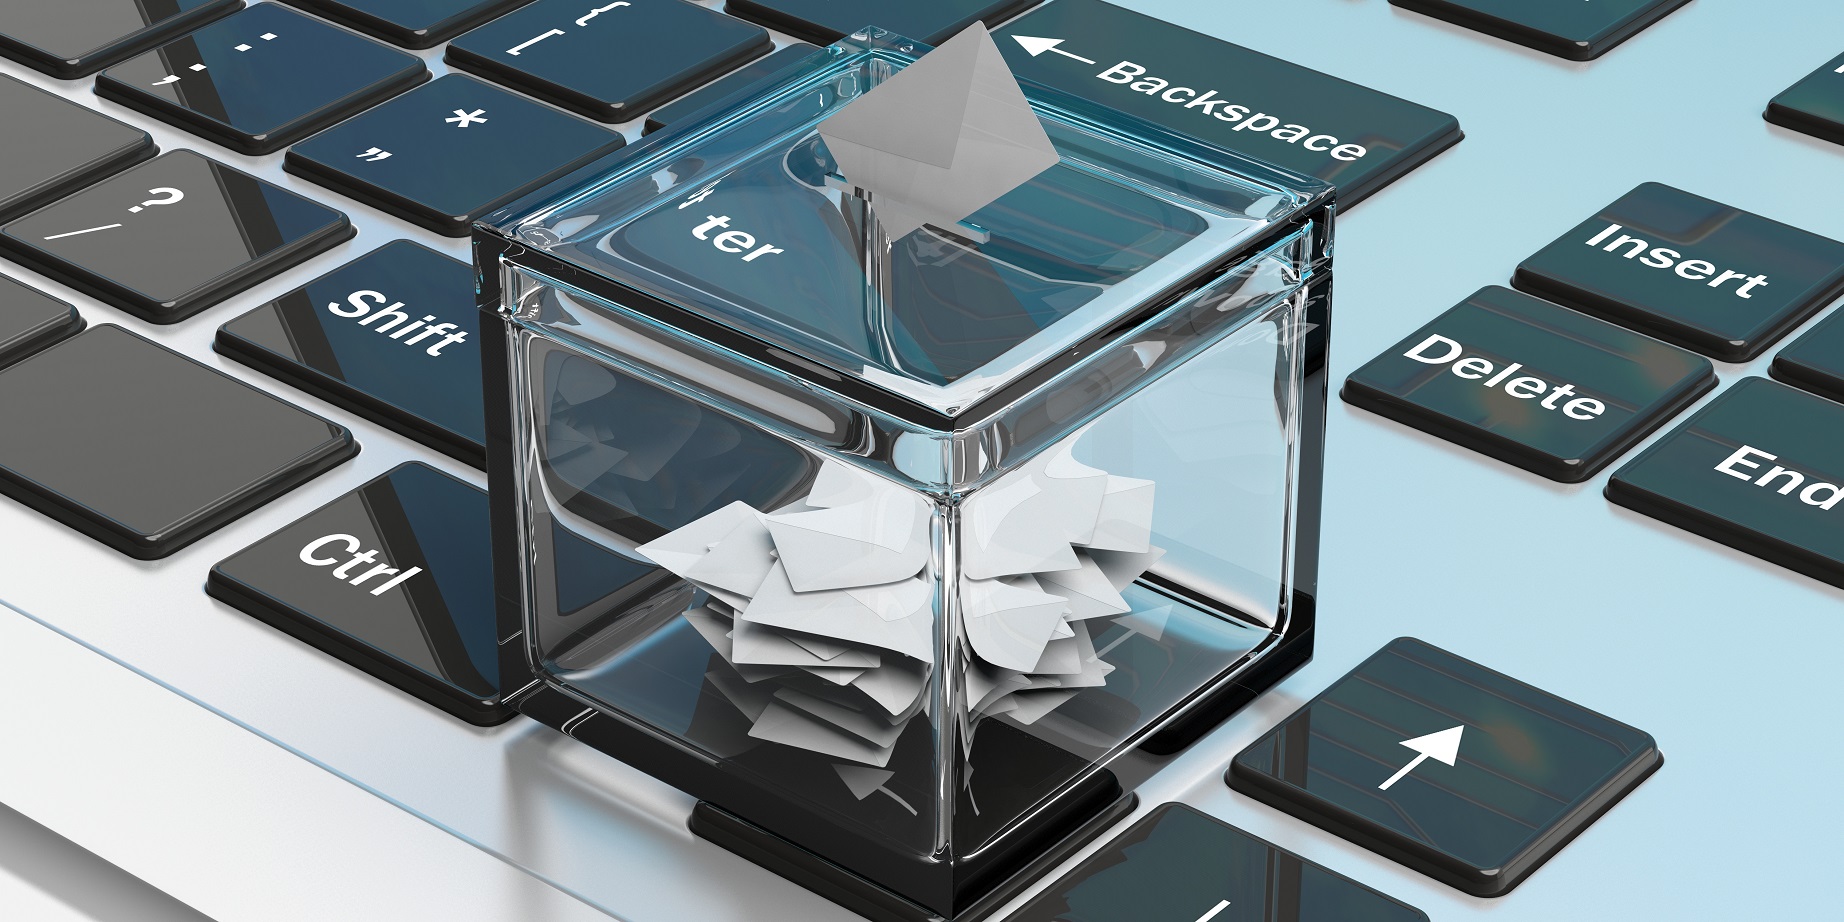 Condominium Manager’s Role in the Electronic Voting Process